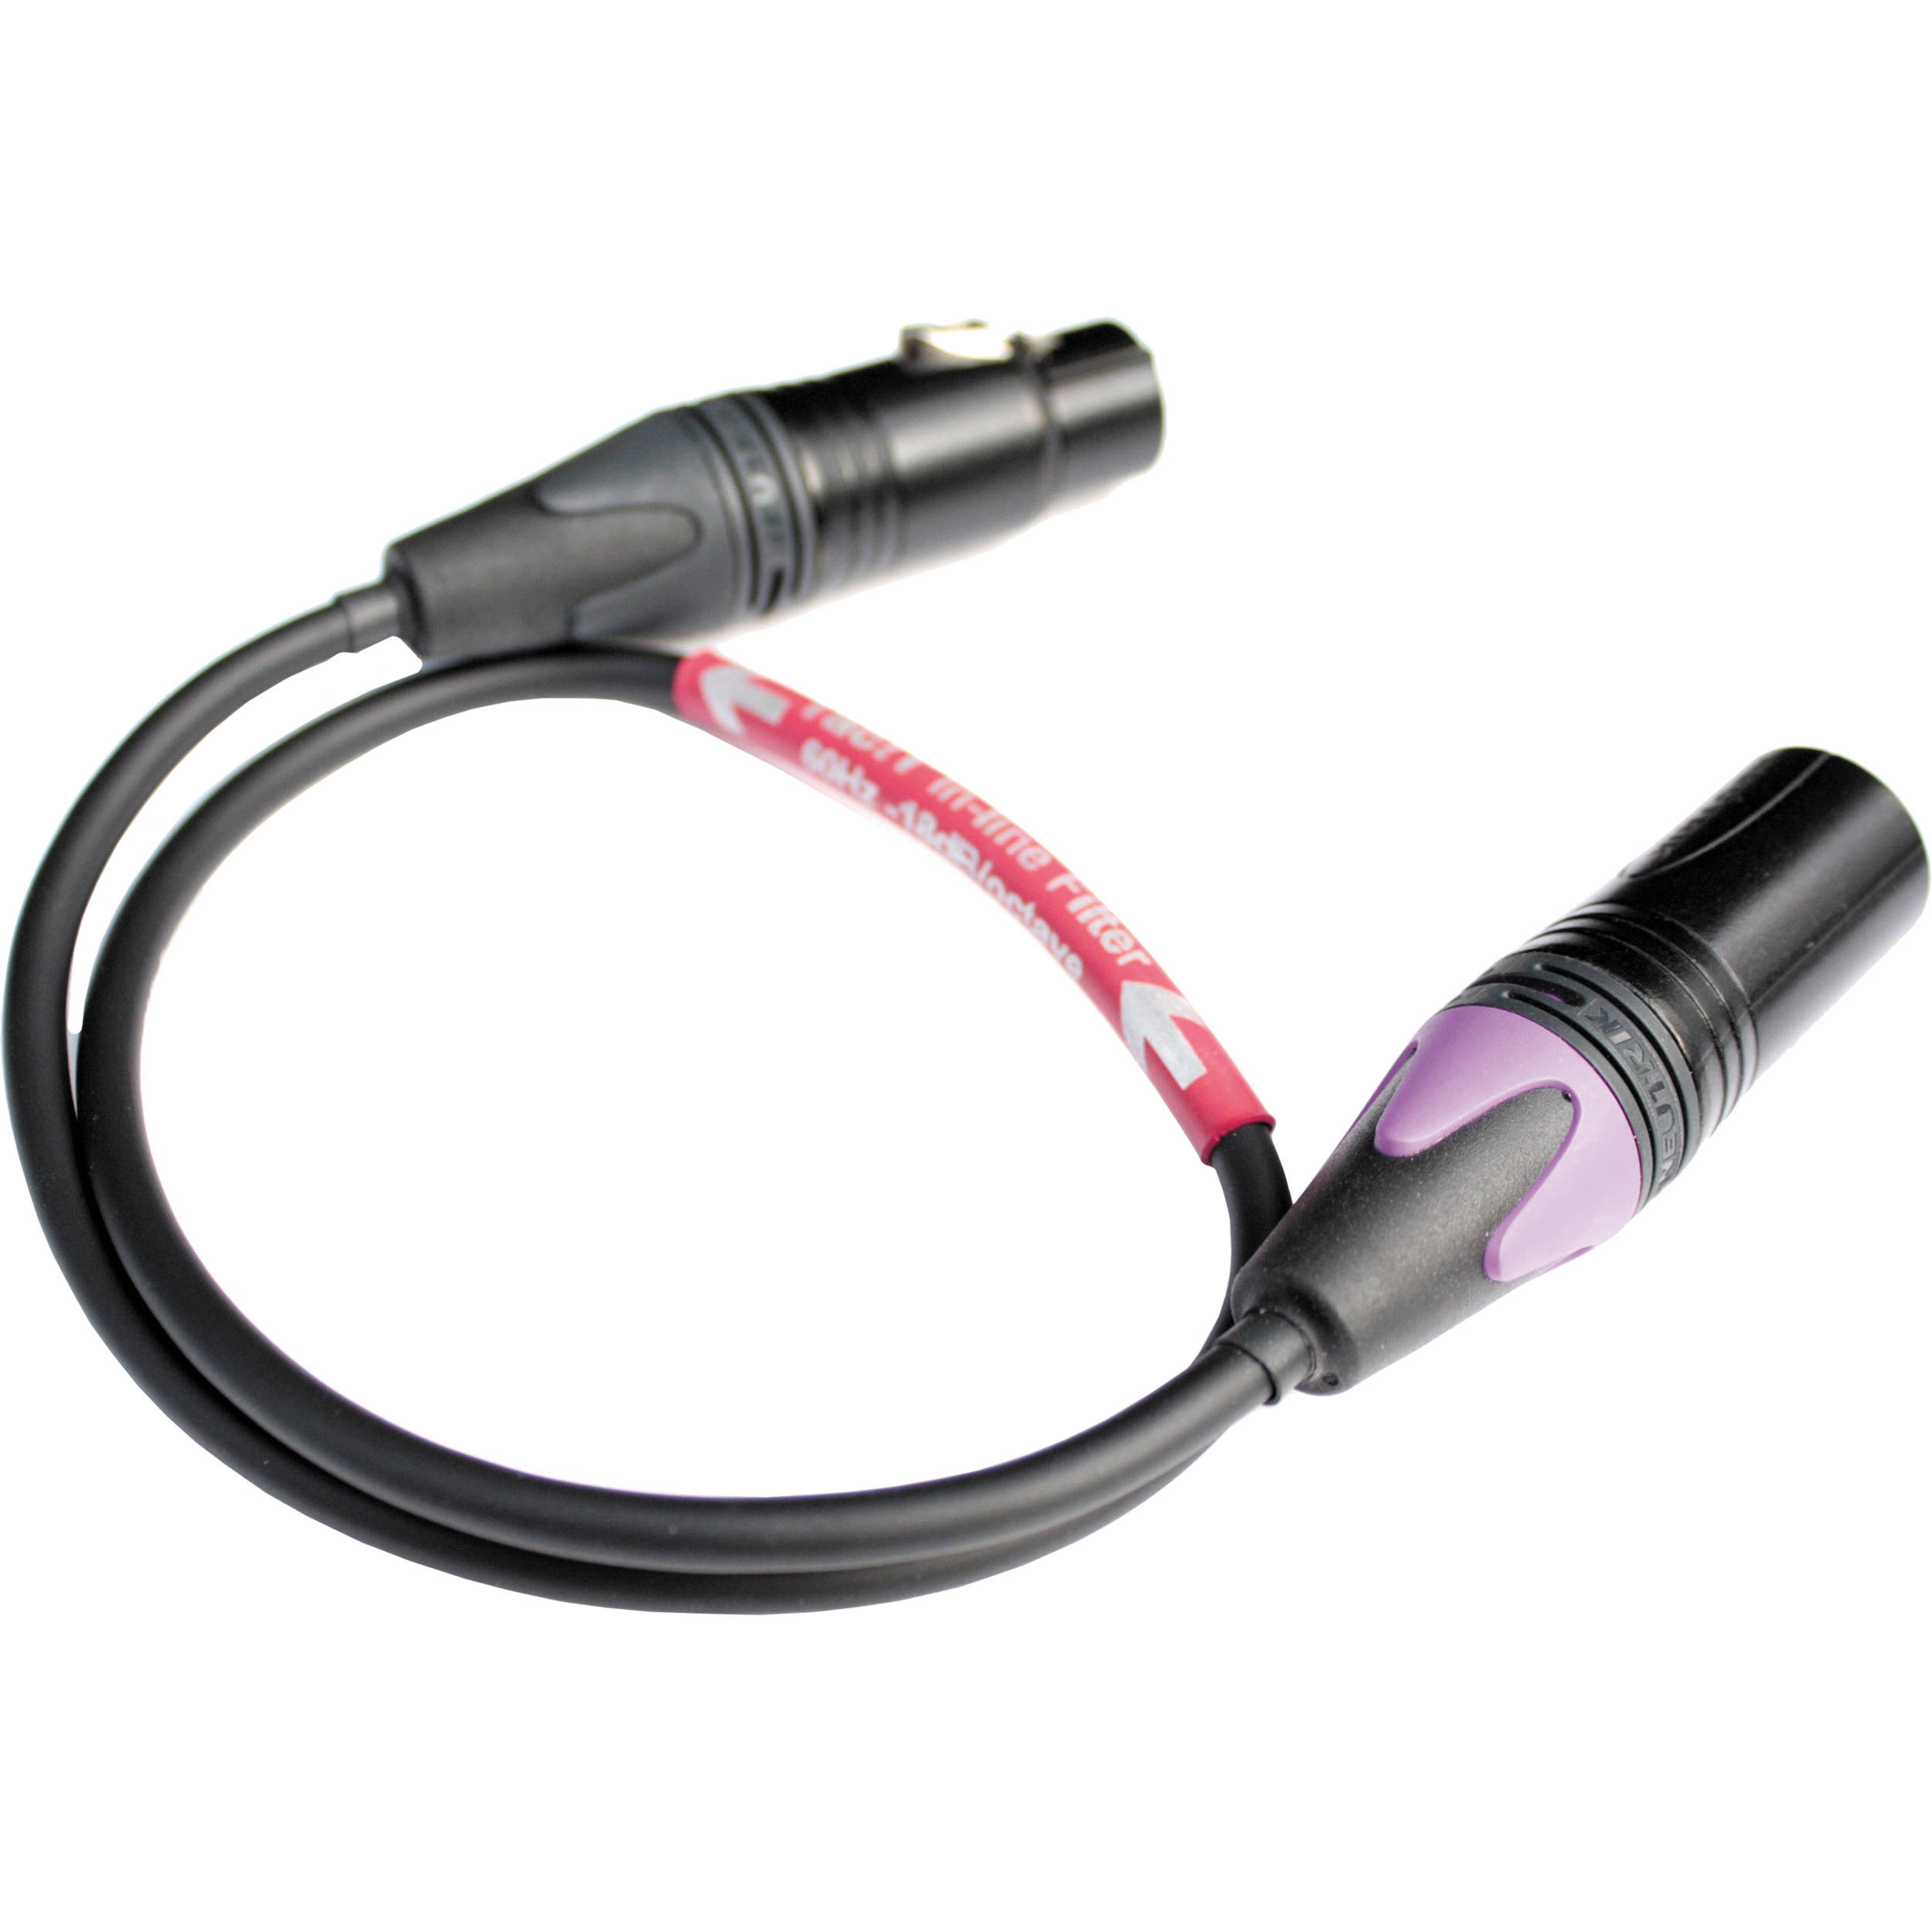 Rycote XLR-3F to XLR-3M Cable with TAC!T Filter (45cm)